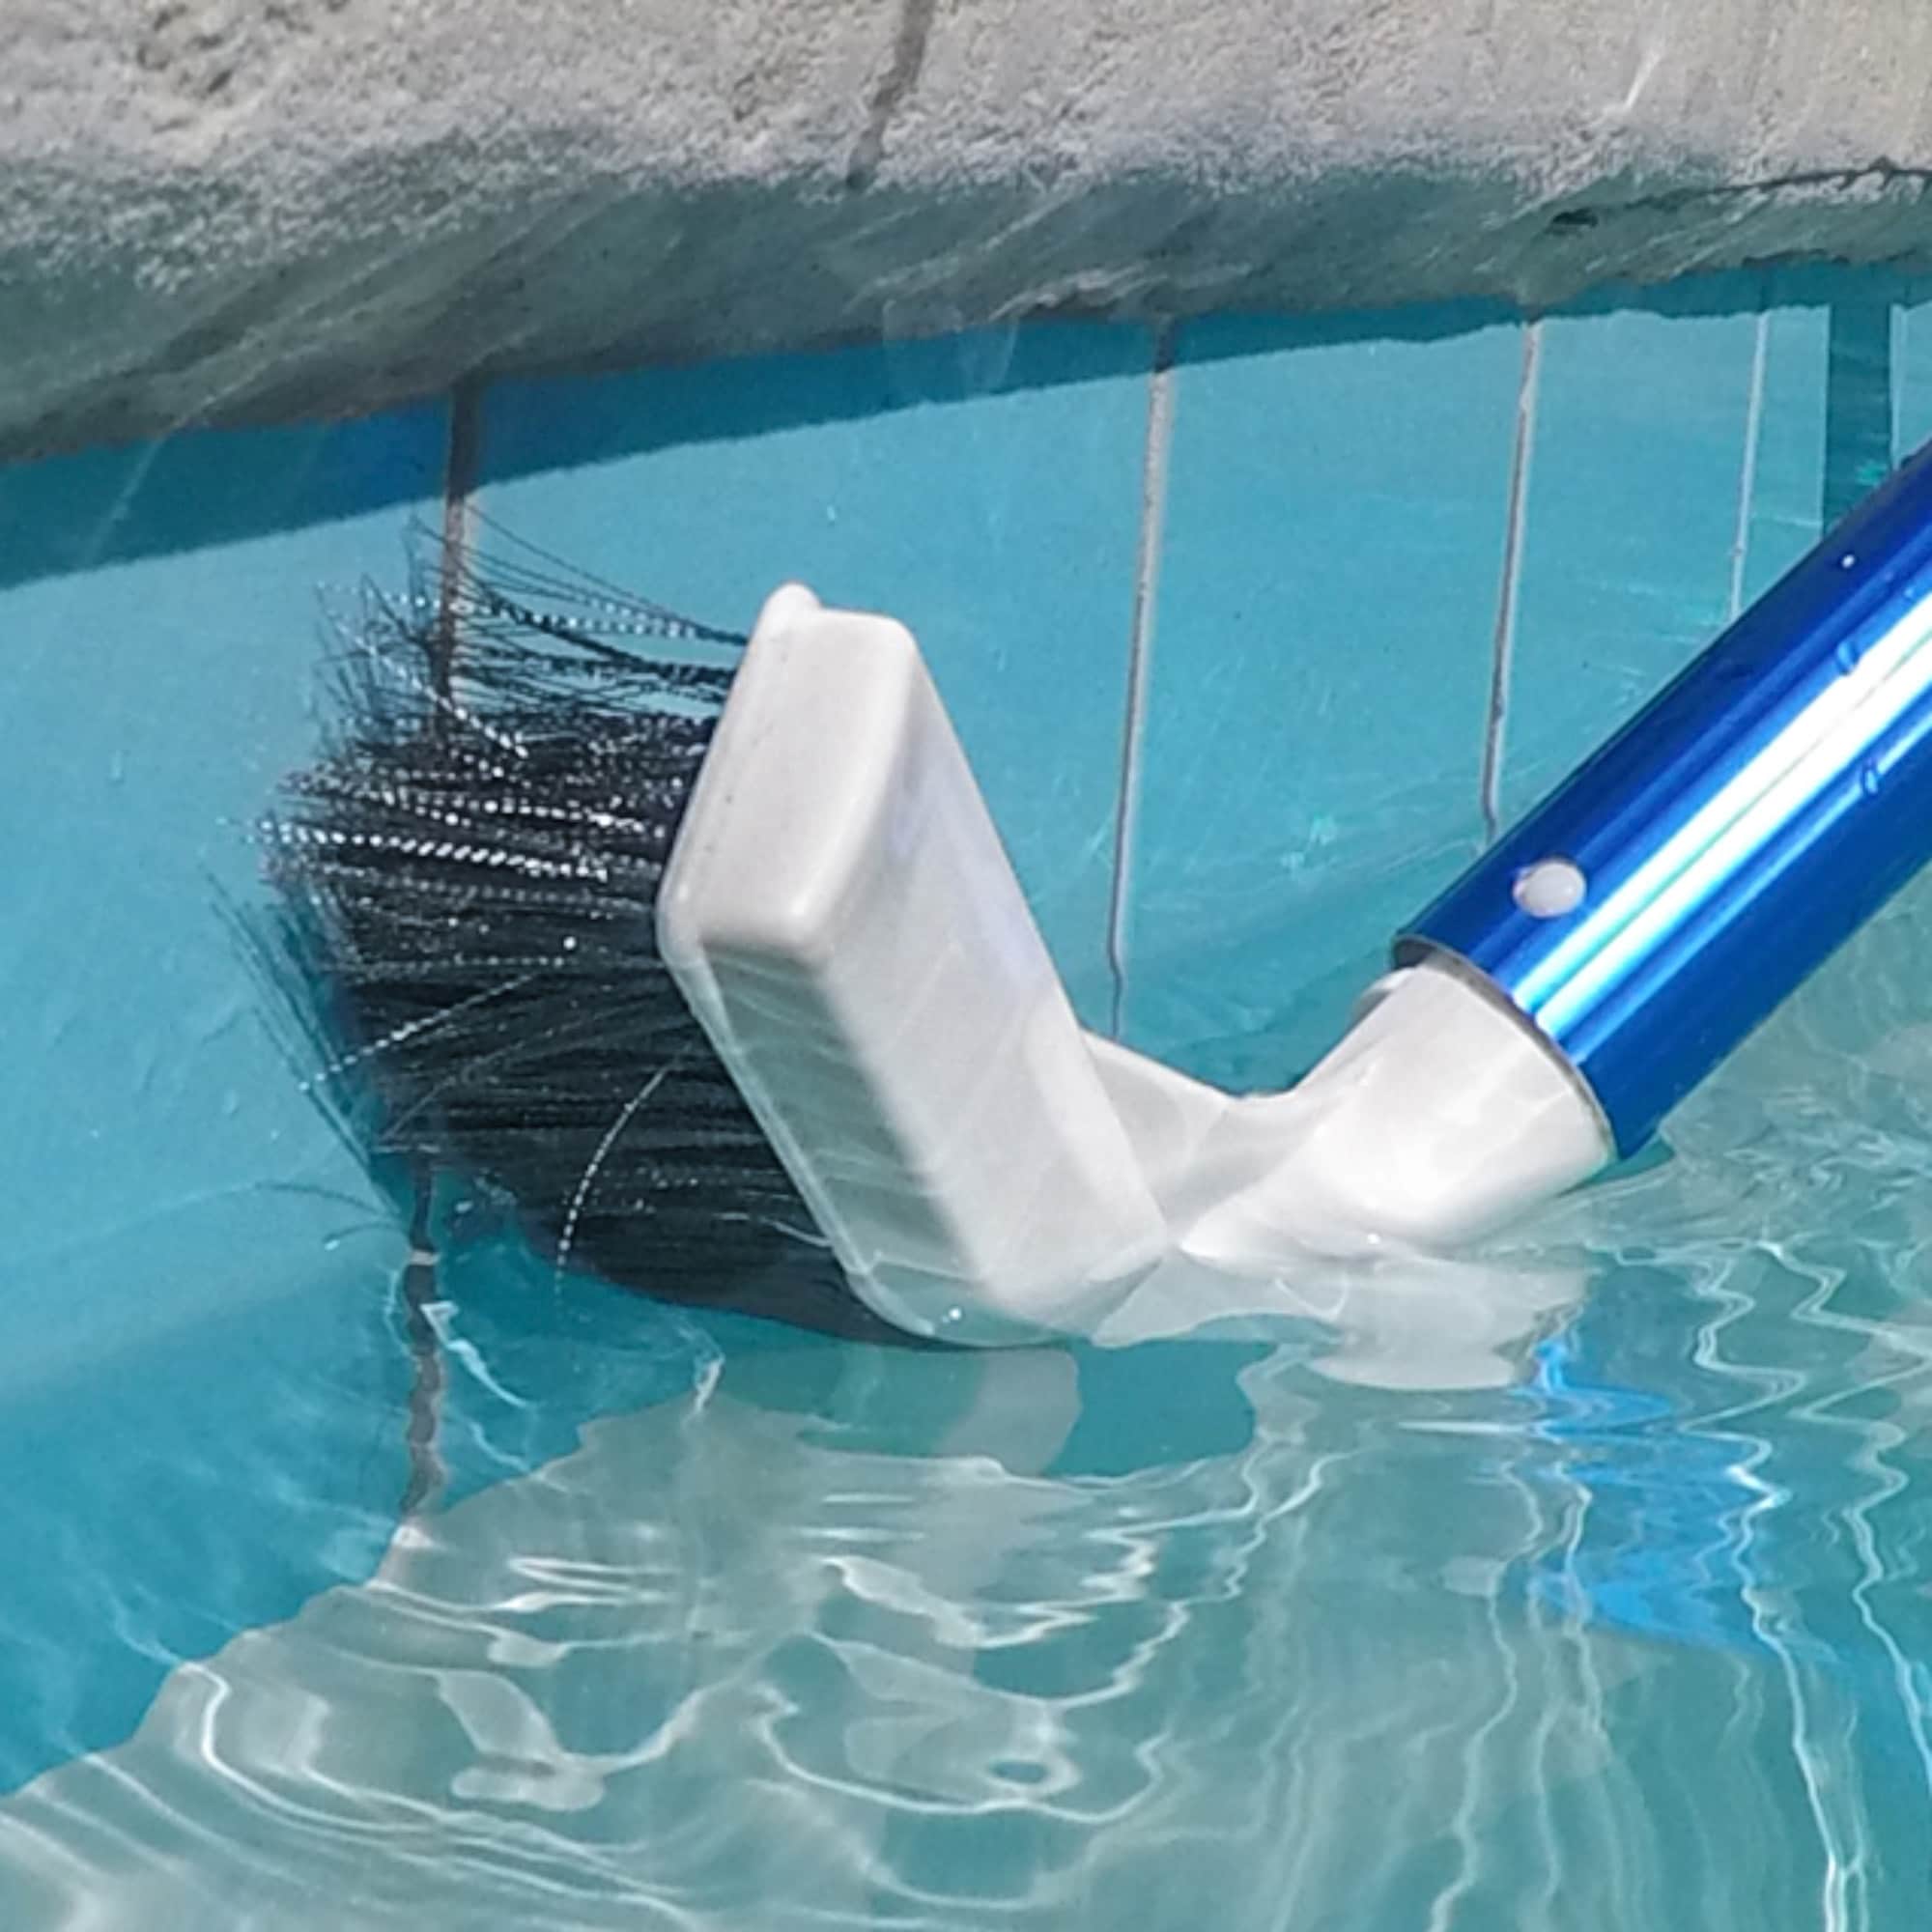 Kitchen Cleaning Brush, Pool Brush Cleaner